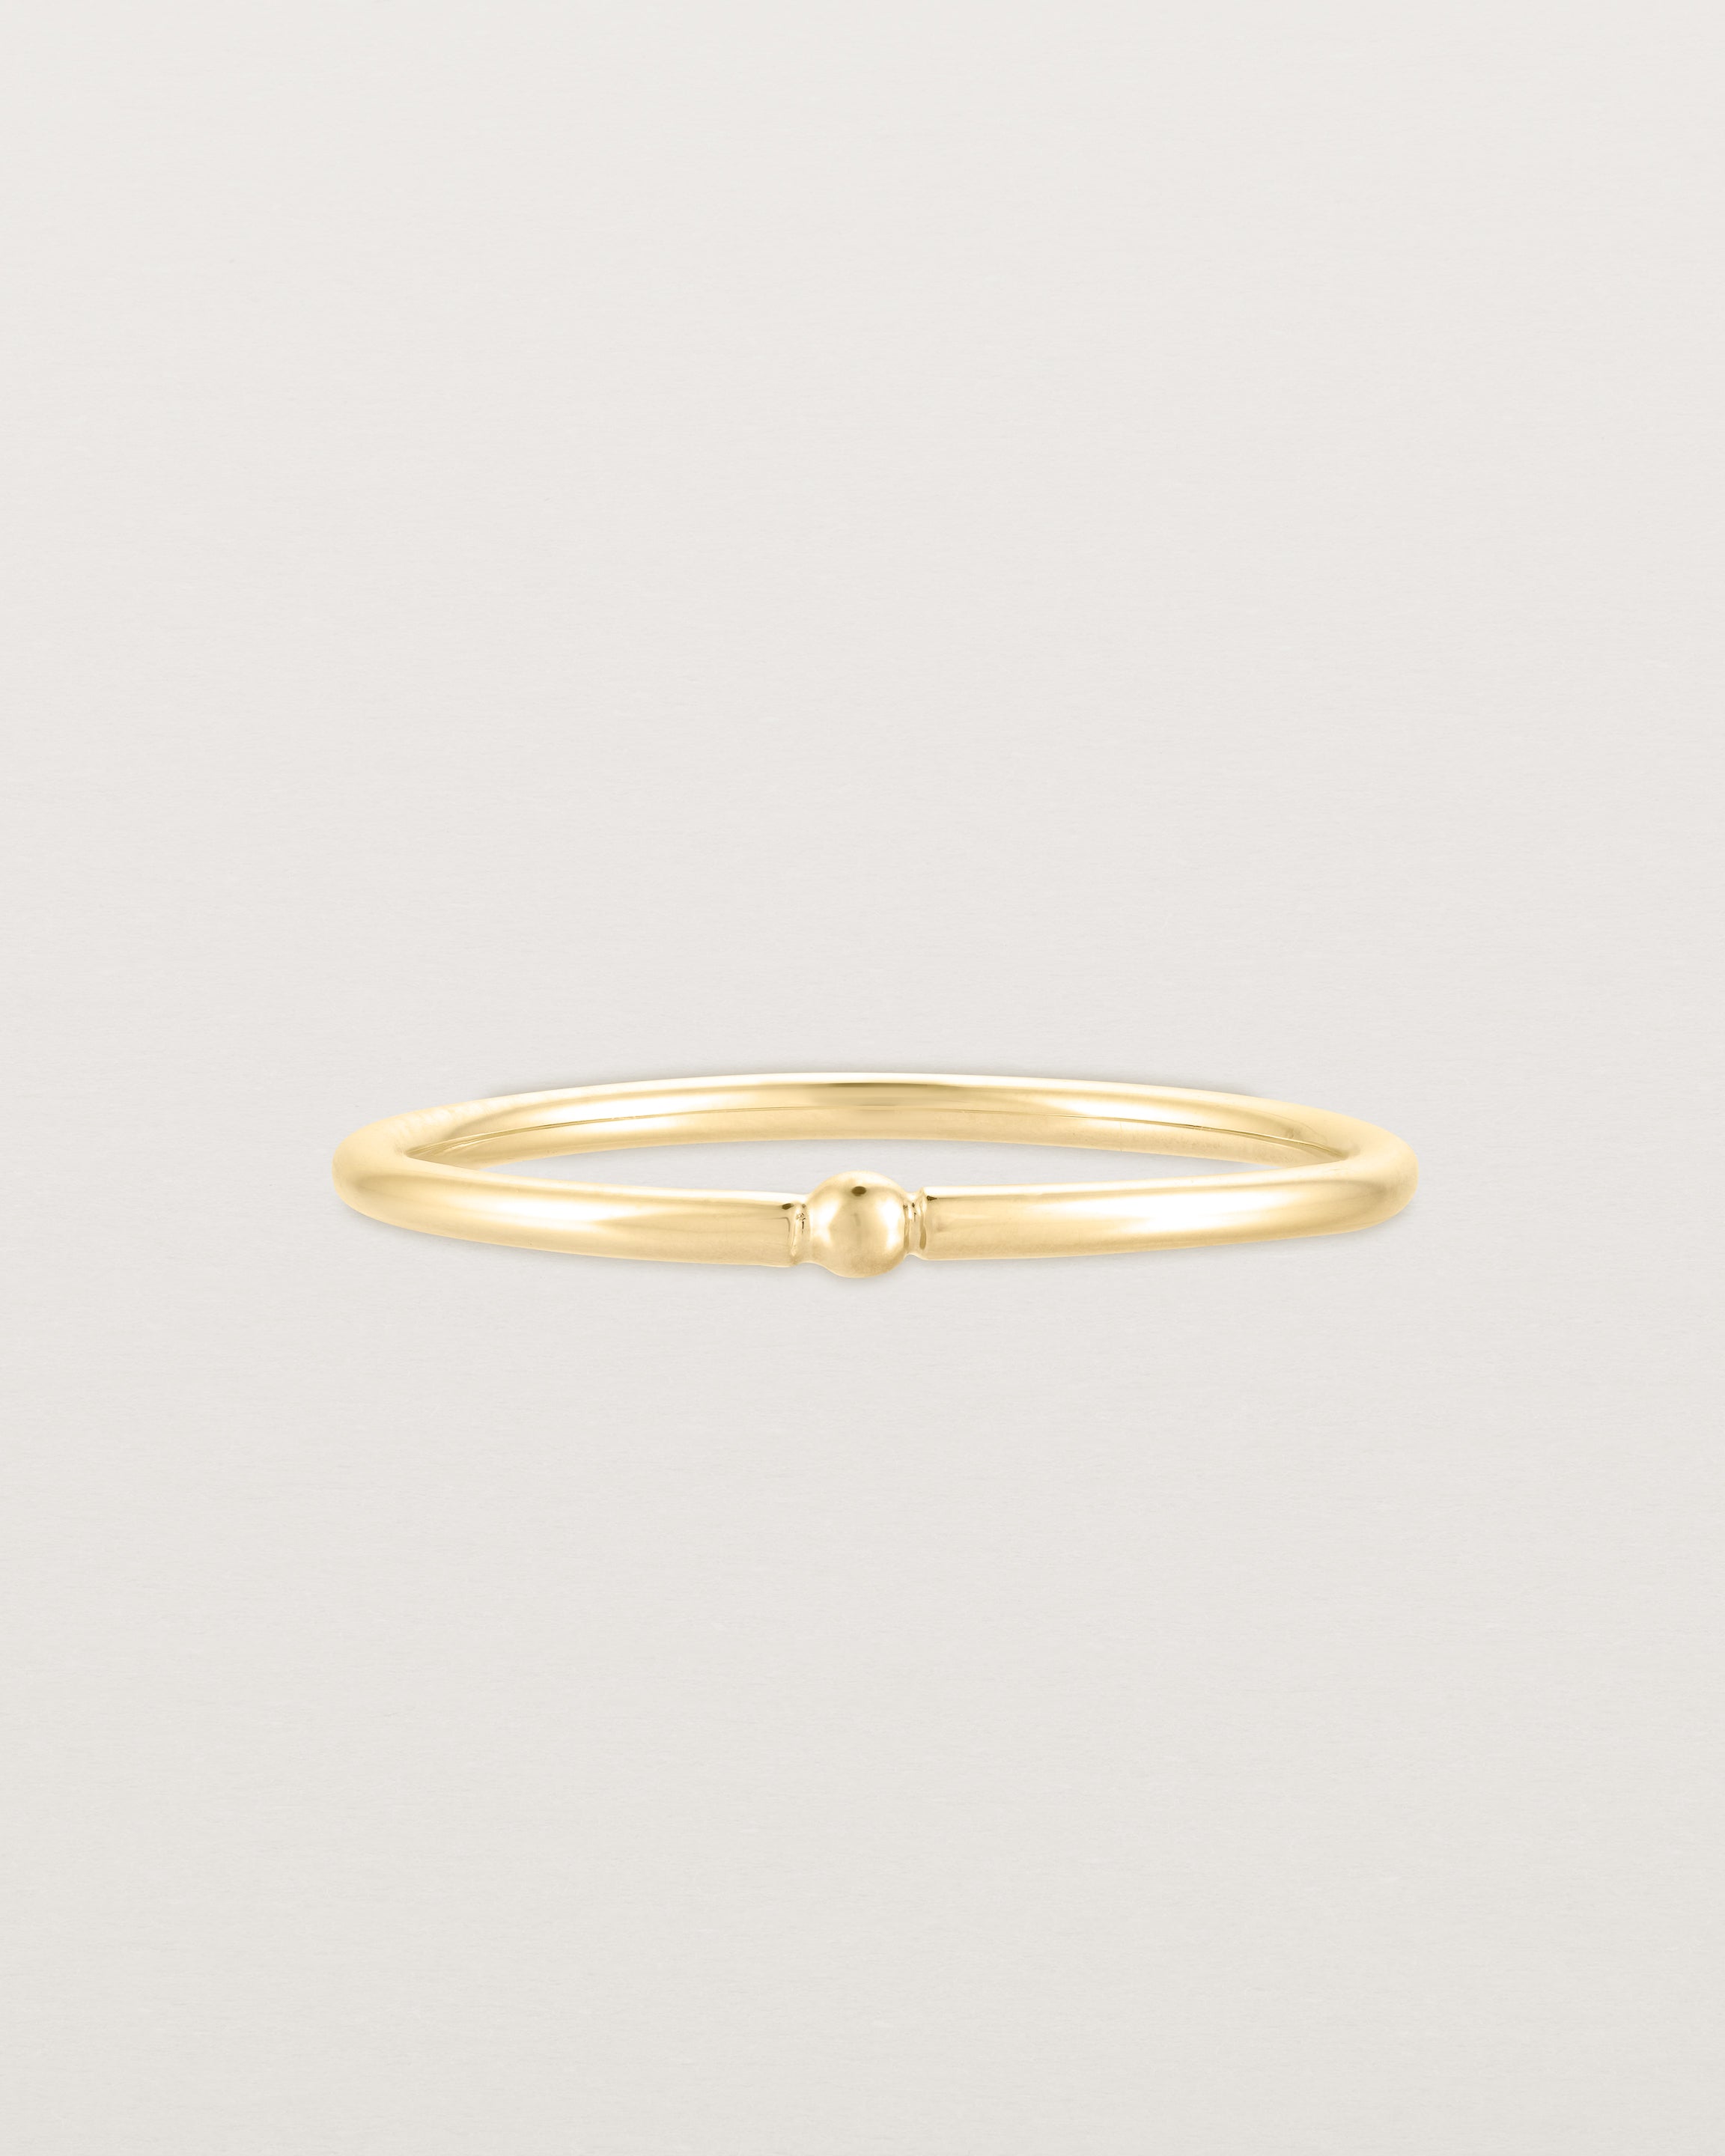 Front view of the Suspend Ring in Yellow Gold.